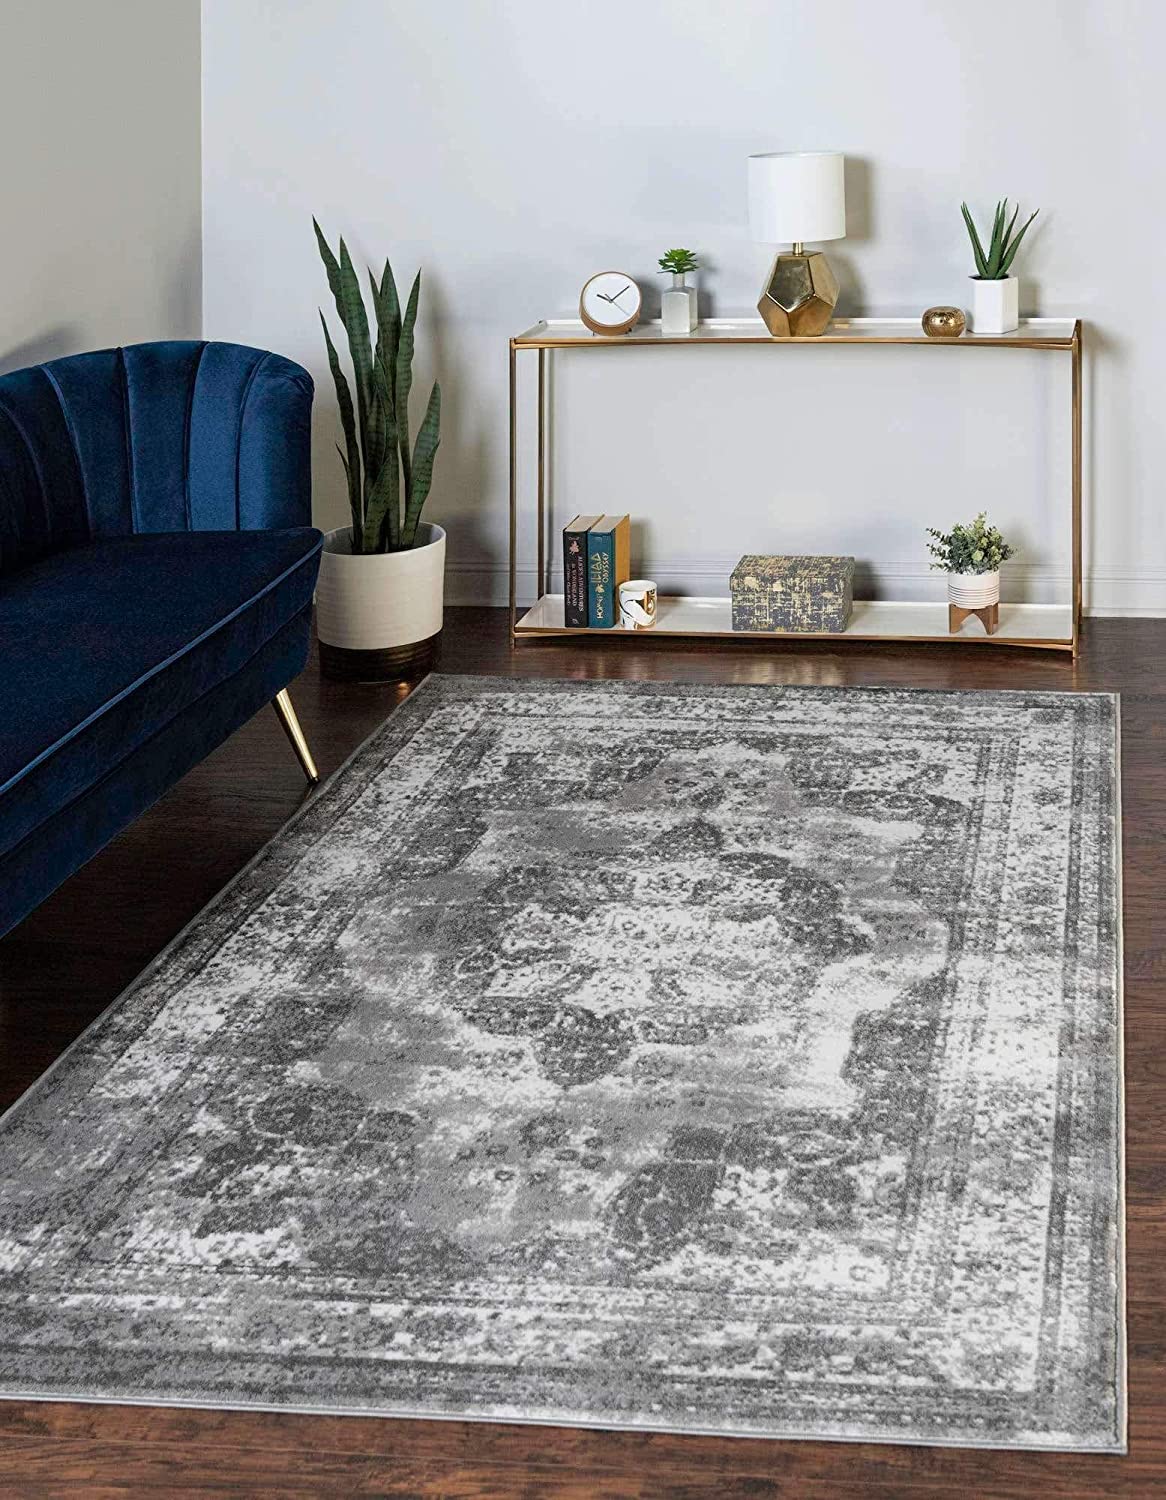 Why Vintage Rug Is Still Evergreen For Even Modern House Interiors?